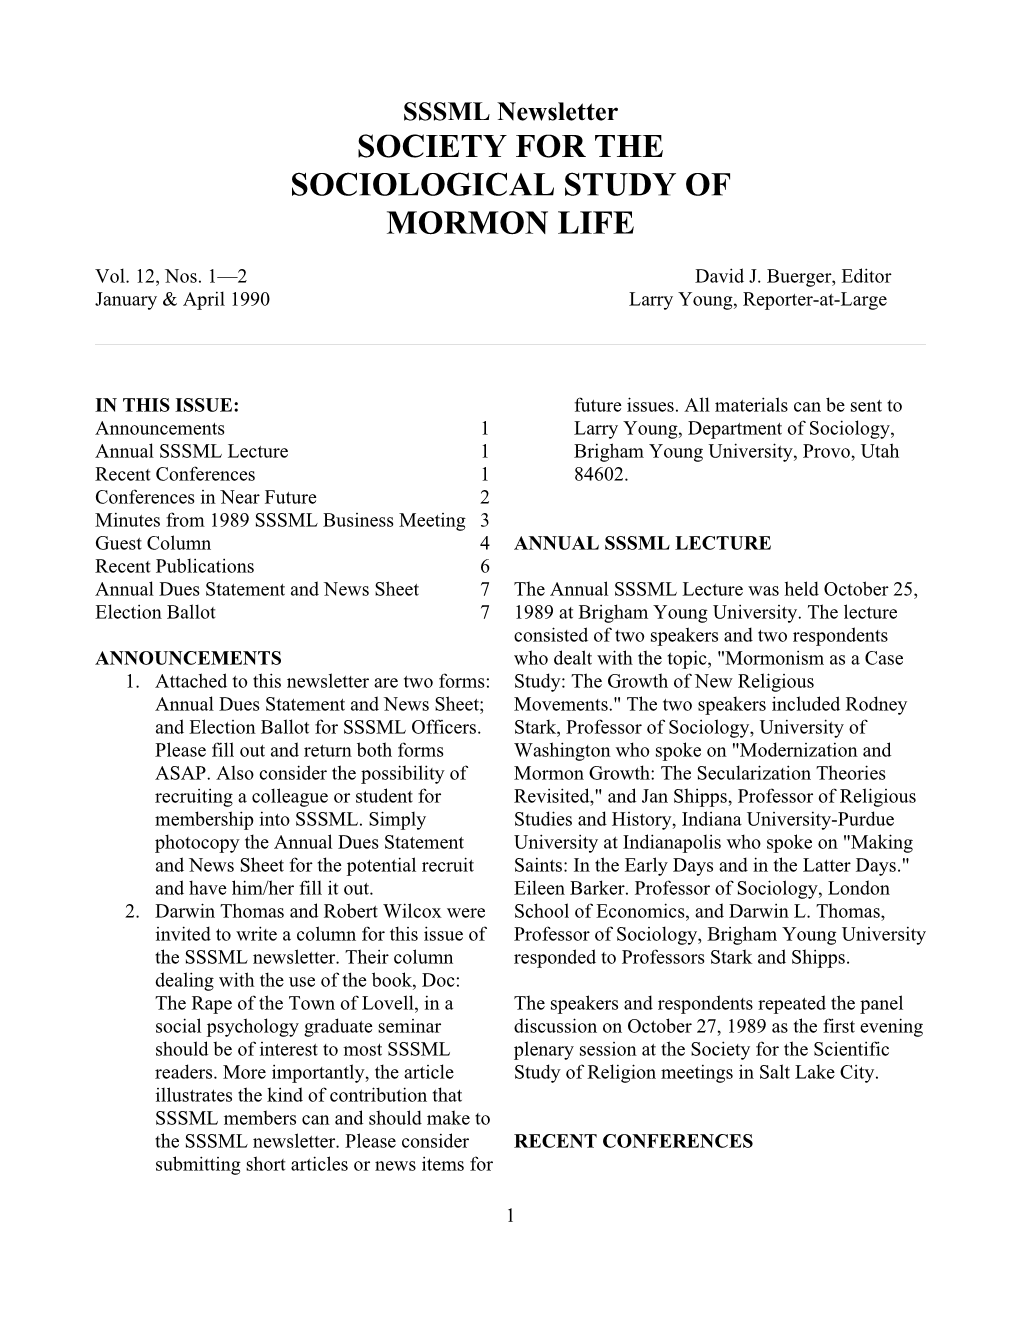 Society for the Sociological Study of Mormon Life